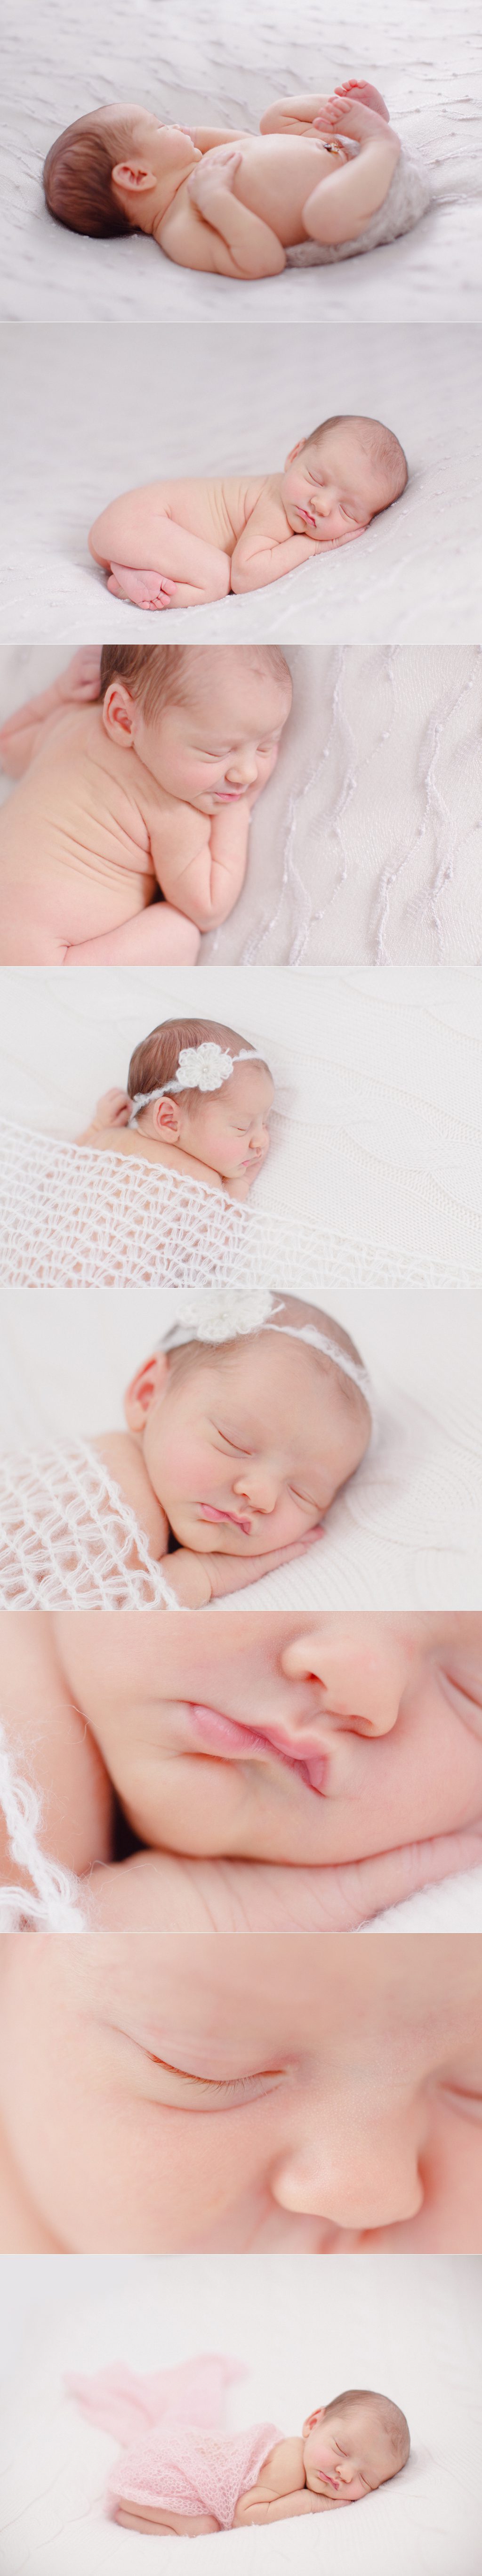 Pure and natural newborn images of a baby girl in Athens, GA.